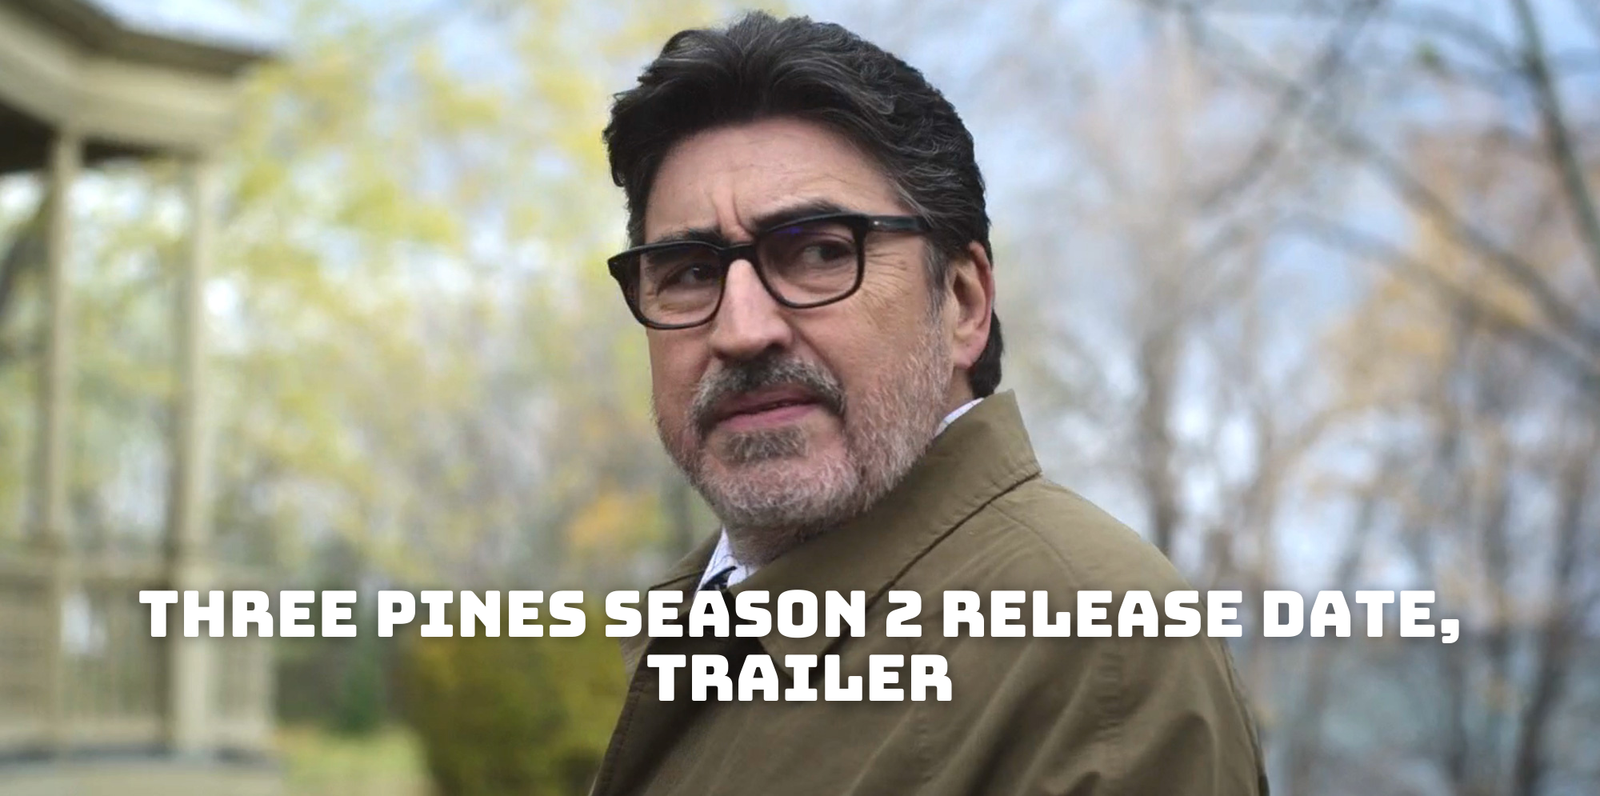 Three Pines Season 2 Release Date, Trailer - Is It Canceled?